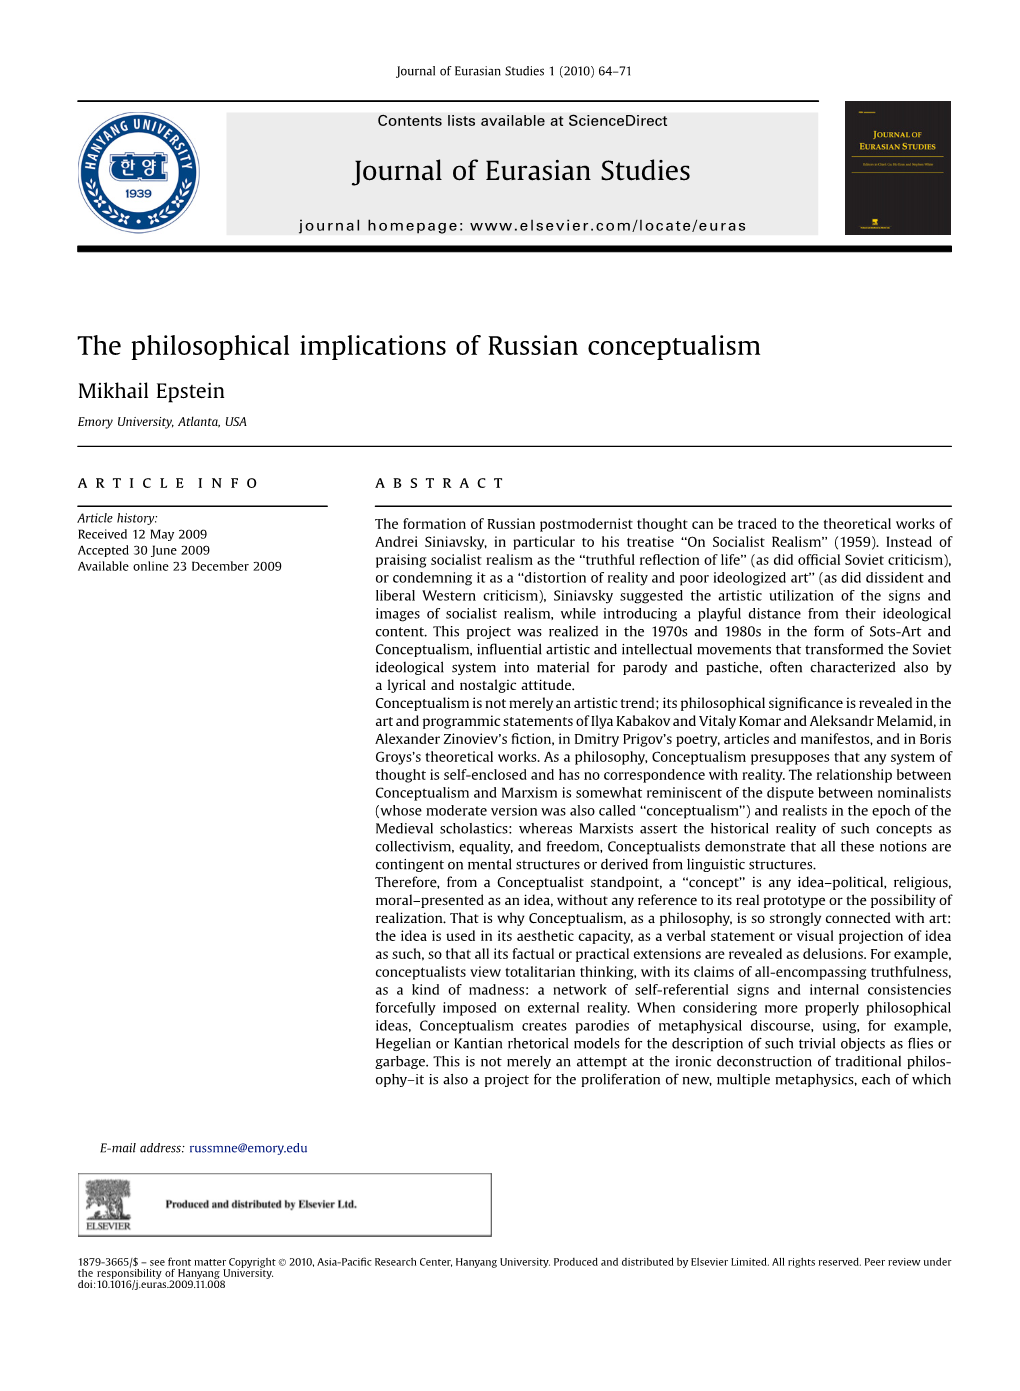 The Philosophical Implications of Russian Conceptualism